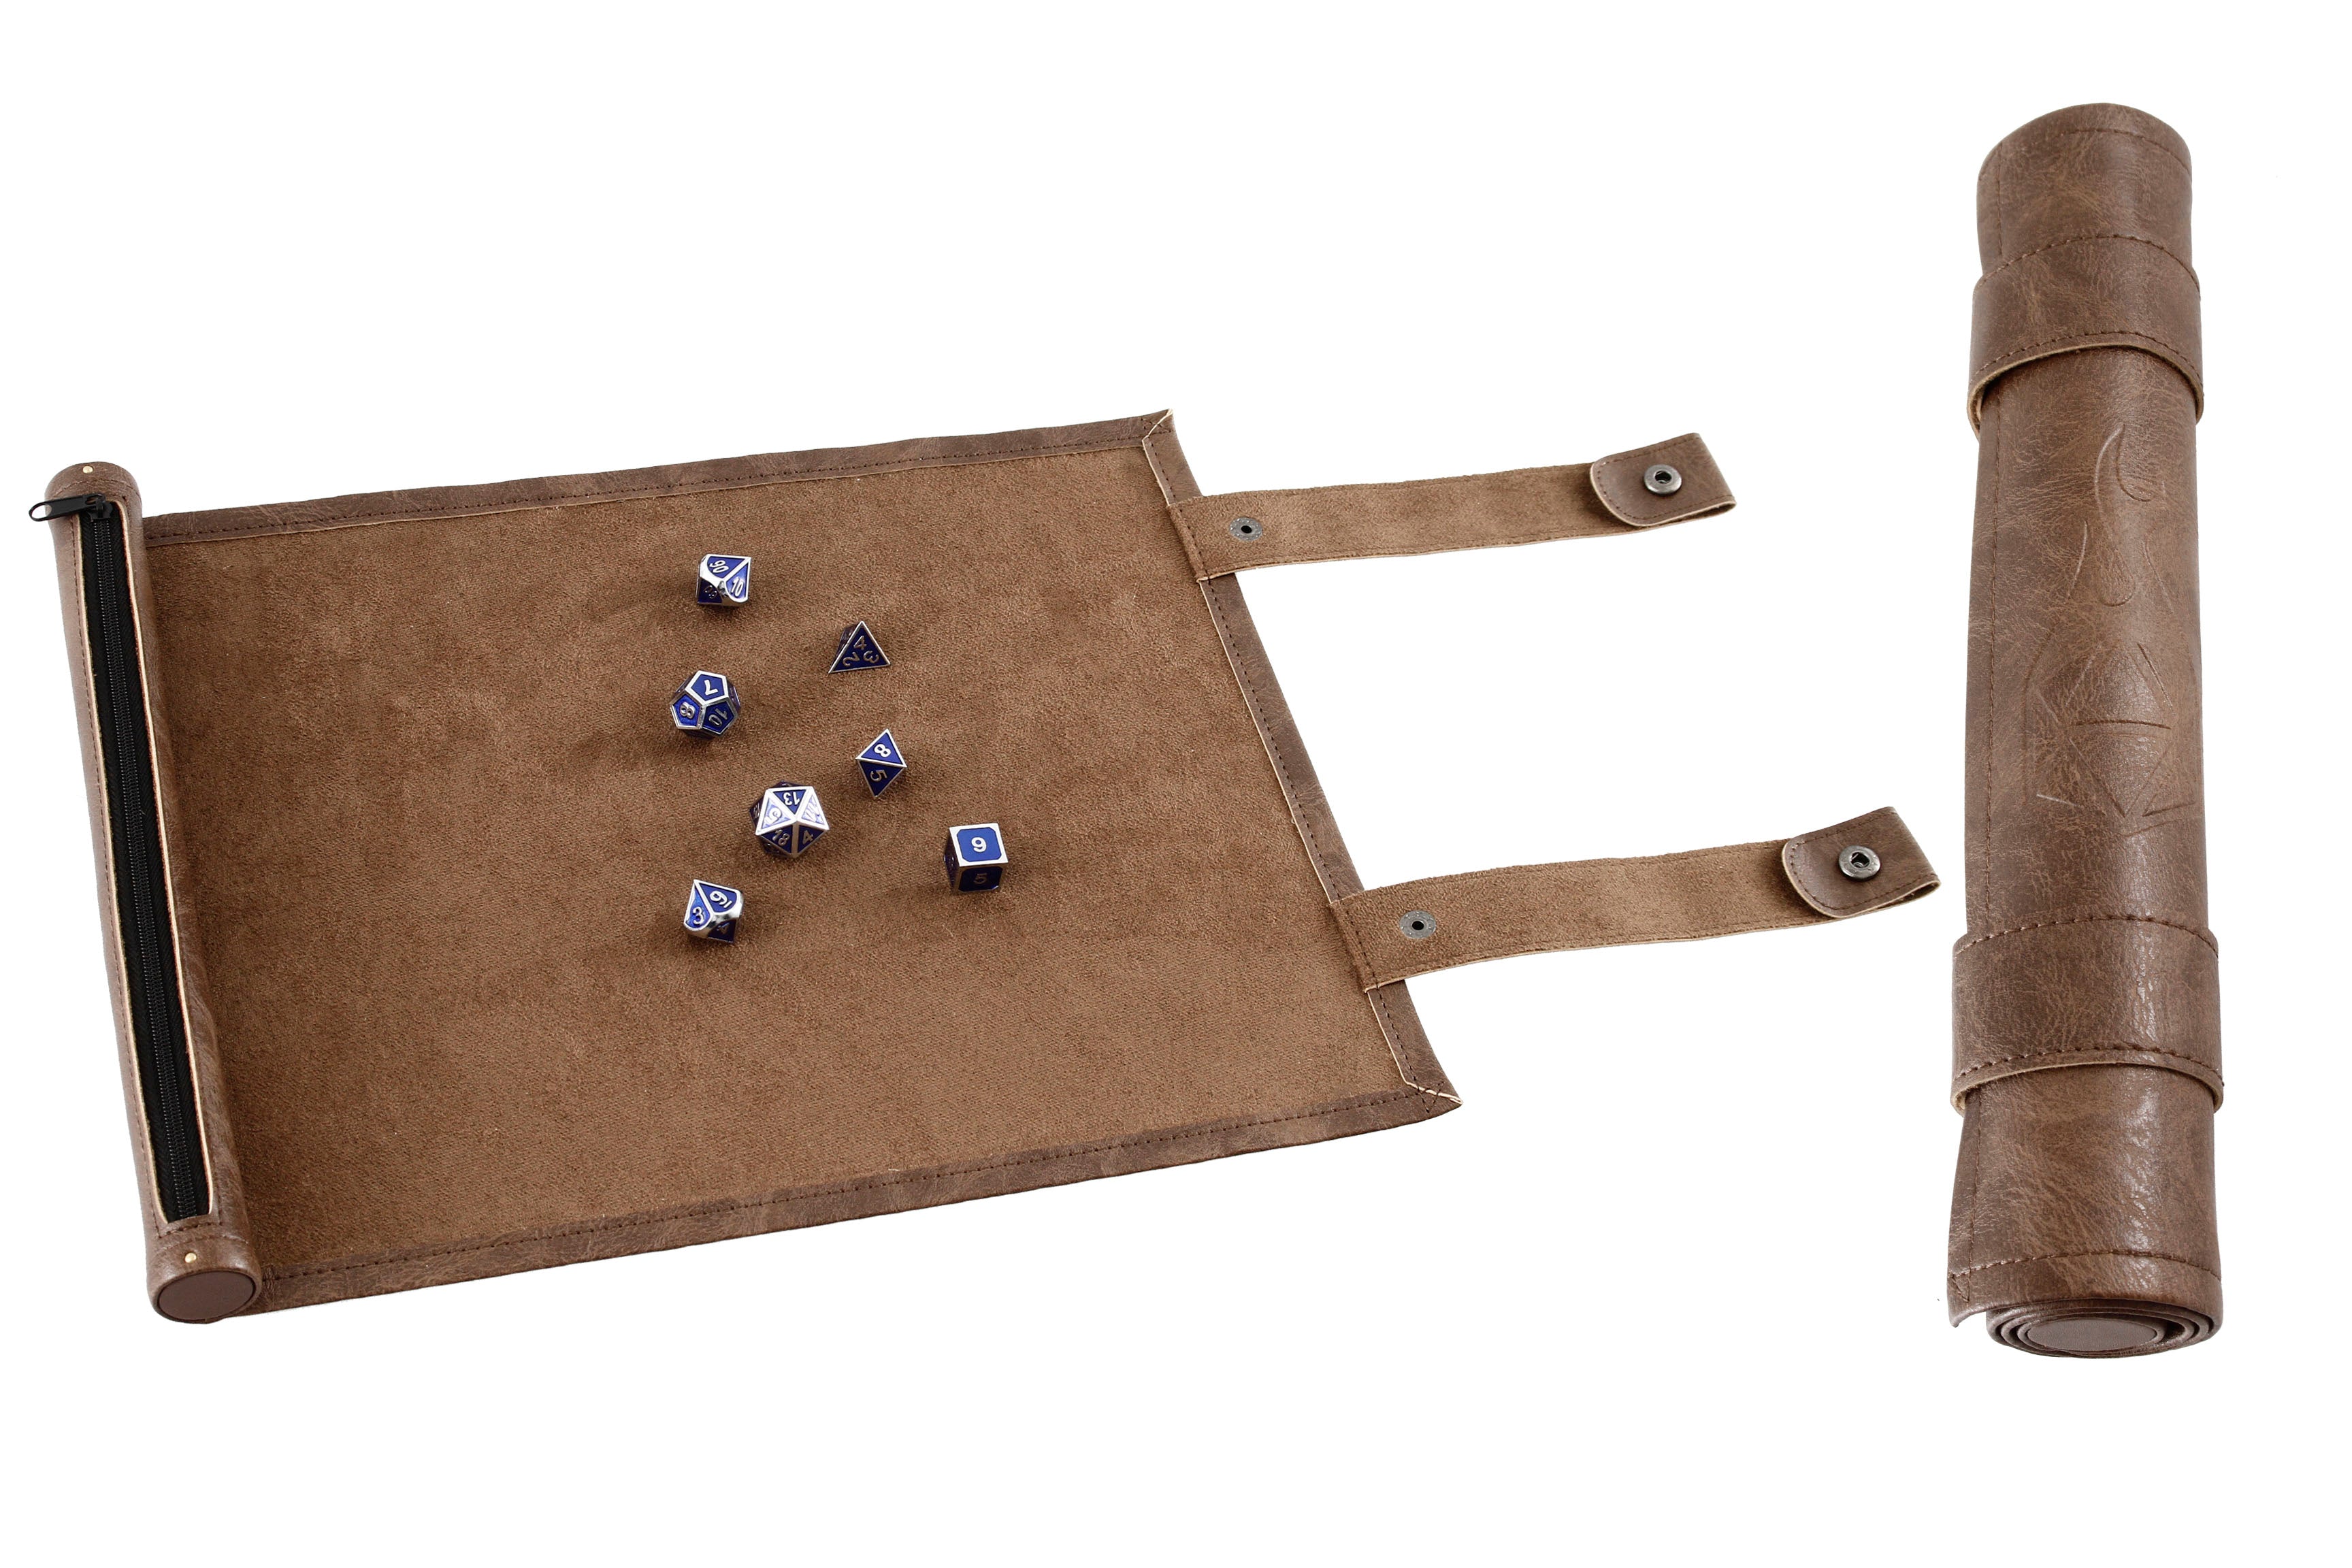 How To Choose Dice Tray